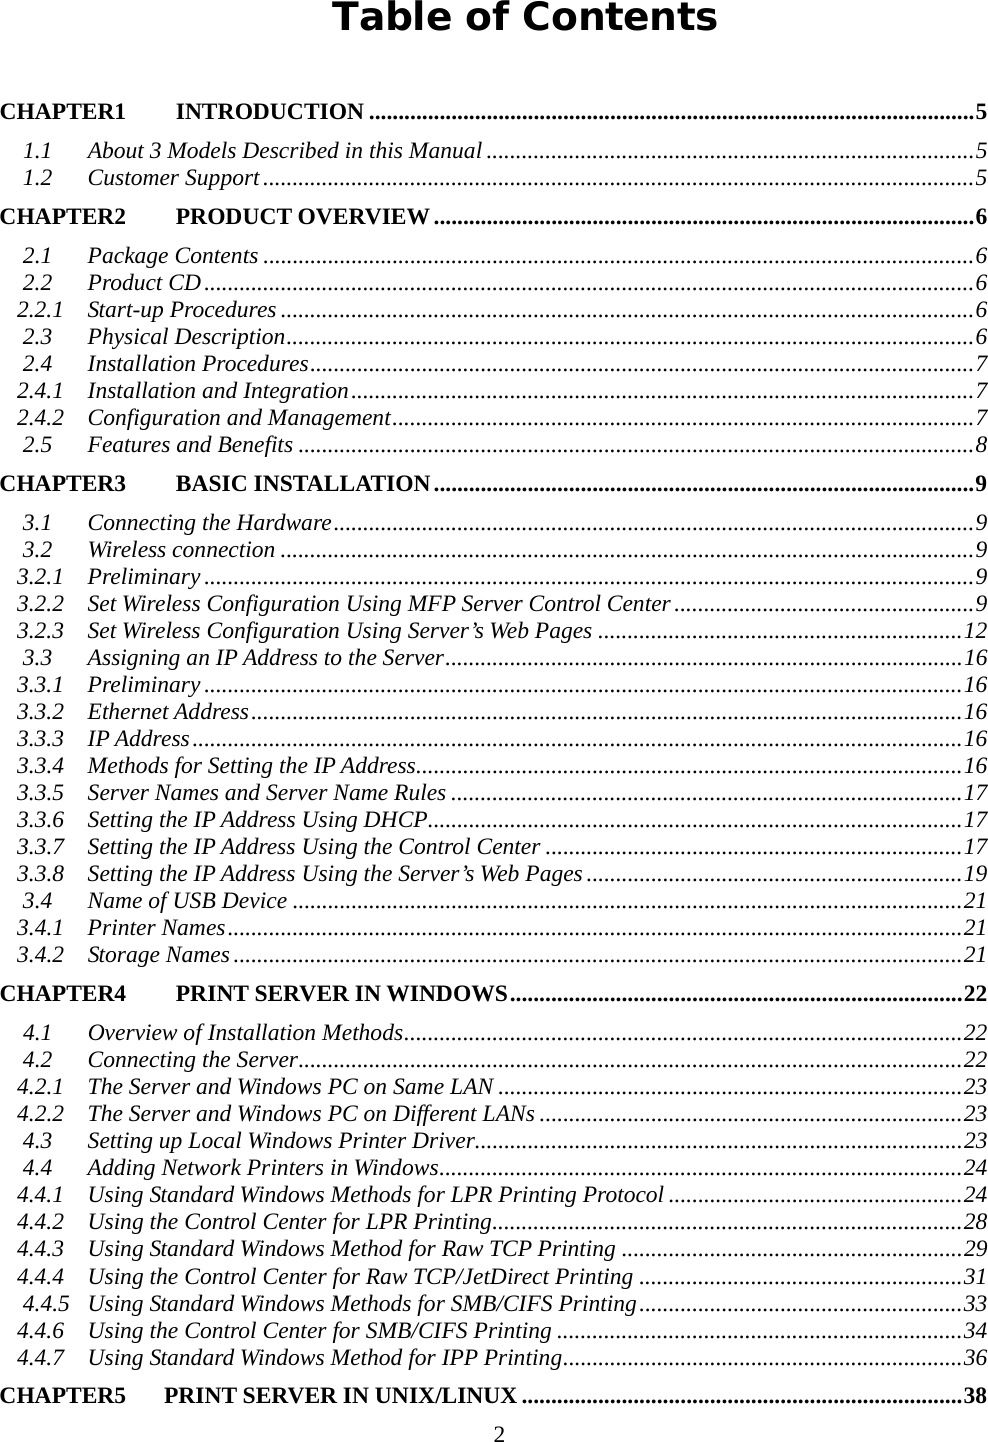     2Table of Contents CHAPTER1  INTRODUCTION .......................................................................................................5 1.1 About 3 Models Described in this Manual ...................................................................................5 1.2 Customer Support.........................................................................................................................5 CHAPTER2  PRODUCT OVERVIEW............................................................................................6 2.1 Package Contents .........................................................................................................................6 2.2 Product CD...................................................................................................................................6 2.2.1 Start-up Procedures ......................................................................................................................6 2.3 Physical Description.....................................................................................................................6 2.4 Installation Procedures.................................................................................................................7 2.4.1 Installation and Integration..........................................................................................................7 2.4.2 Configuration and Management...................................................................................................7 2.5 Features and Benefits ...................................................................................................................8 CHAPTER3  BASIC INSTALLATION............................................................................................9 3.1 Connecting the Hardware.............................................................................................................9 3.2 Wireless connection ......................................................................................................................9 3.2.1 Preliminary ...................................................................................................................................9 3.2.2 Set Wireless Configuration Using MFP Server Control Center ...................................................9 3.2.3 Set Wireless Configuration Using Server’s Web Pages ..............................................................12 3.3 Assigning an IP Address to the Server........................................................................................16 3.3.1 Preliminary .................................................................................................................................16 3.3.2 Ethernet Address.........................................................................................................................16 3.3.3 IP Address...................................................................................................................................16 3.3.4 Methods for Setting the IP Address.............................................................................................16 3.3.5 Server Names and Server Name Rules .......................................................................................17 3.3.6 Setting the IP Address Using DHCP...........................................................................................17 3.3.7 Setting the IP Address Using the Control Center .......................................................................17 3.3.8 Setting the IP Address Using the Server’s Web Pages ................................................................19 3.4 Name of USB Device ..................................................................................................................21 3.4.1 Printer Names.............................................................................................................................21 3.4.2 Storage Names............................................................................................................................21 CHAPTER4  PRINT SERVER IN WINDOWS.............................................................................22 4.1 Overview of Installation Methods...............................................................................................22 4.2 Connecting the Server.................................................................................................................22 4.2.1 The Server and Windows PC on Same LAN ...............................................................................23 4.2.2 The Server and Windows PC on Different LANs ........................................................................23 4.3 Setting up Local Windows Printer Driver...................................................................................23 4.4 Adding Network Printers in Windows.........................................................................................24 4.4.1 Using Standard Windows Methods for LPR Printing Protocol ..................................................24 4.4.2 Using the Control Center for LPR Printing................................................................................28 4.4.3 Using Standard Windows Method for Raw TCP Printing ..........................................................29 4.4.4 Using the Control Center for Raw TCP/JetDirect Printing .......................................................31 4.4.5 Using Standard Windows Methods for SMB/CIFS Printing.......................................................33 4.4.6 Using the Control Center for SMB/CIFS Printing .....................................................................34 4.4.7 Using Standard Windows Method for IPP Printing....................................................................36 CHAPTER5    PRINT SERVER IN UNIX/LINUX...........................................................................38 